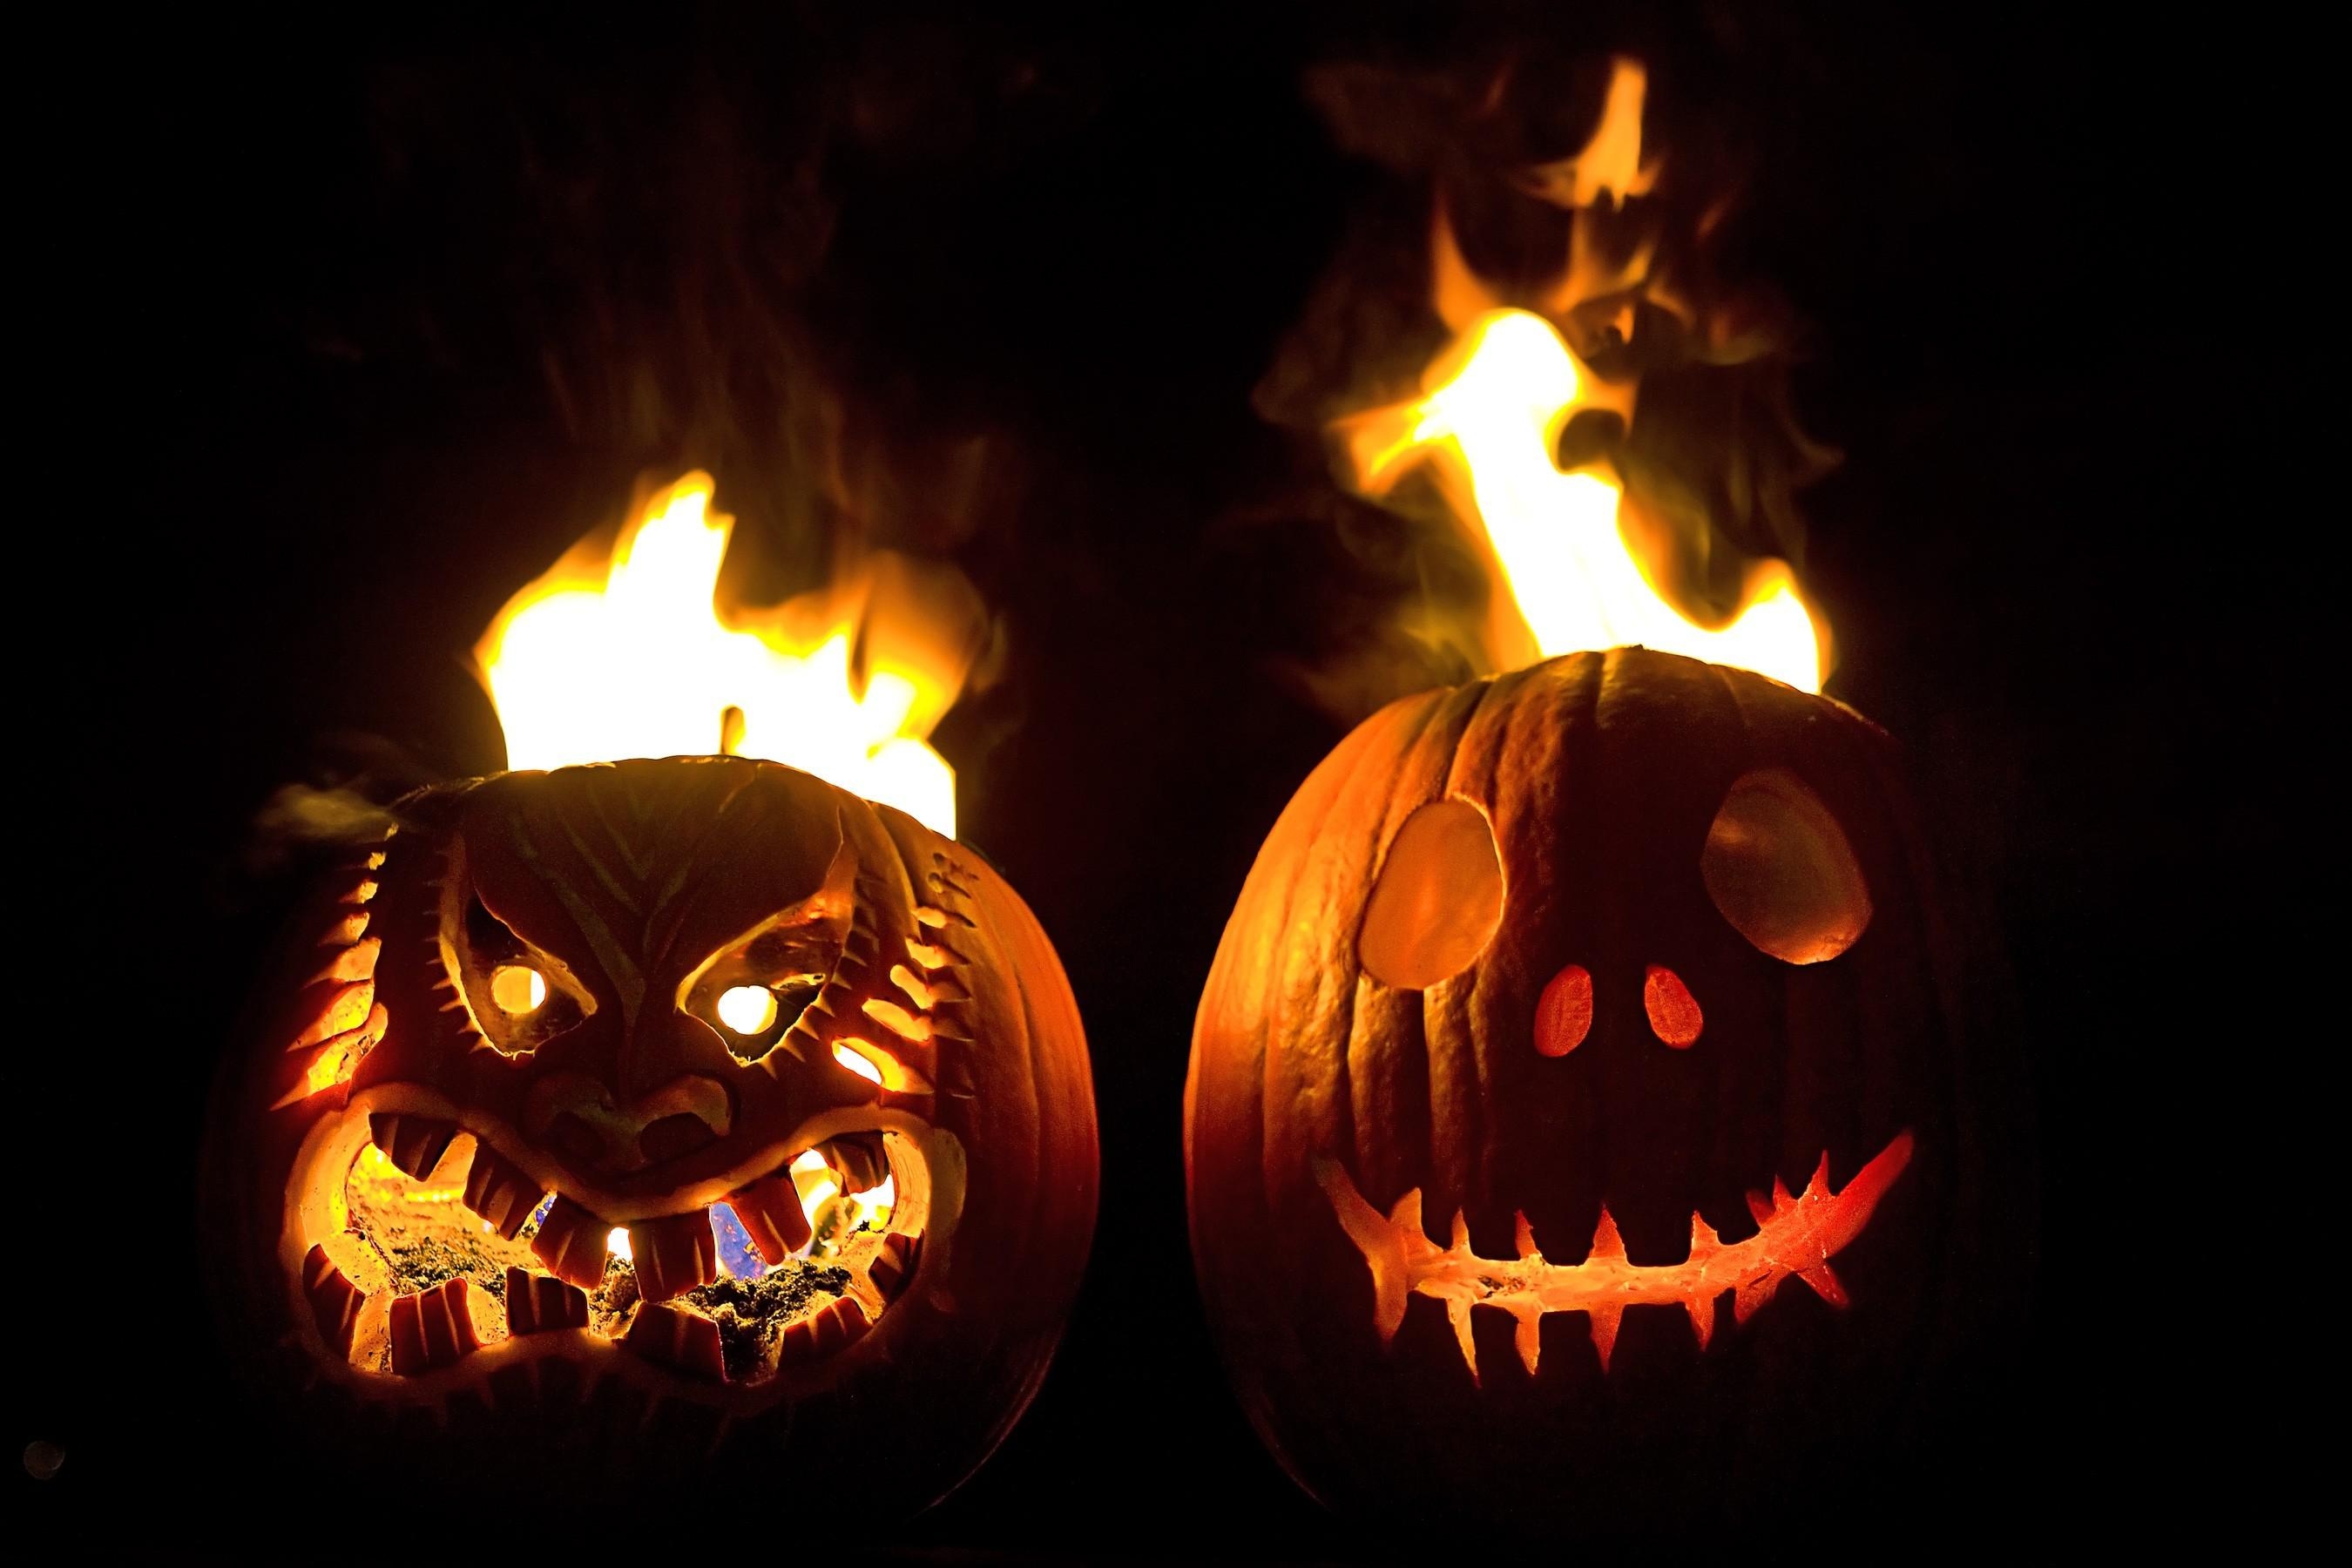 halloween, holidays, fire, pumpkin, couple, pair, muzzle, holiday, black background, muzzles Image for desktop